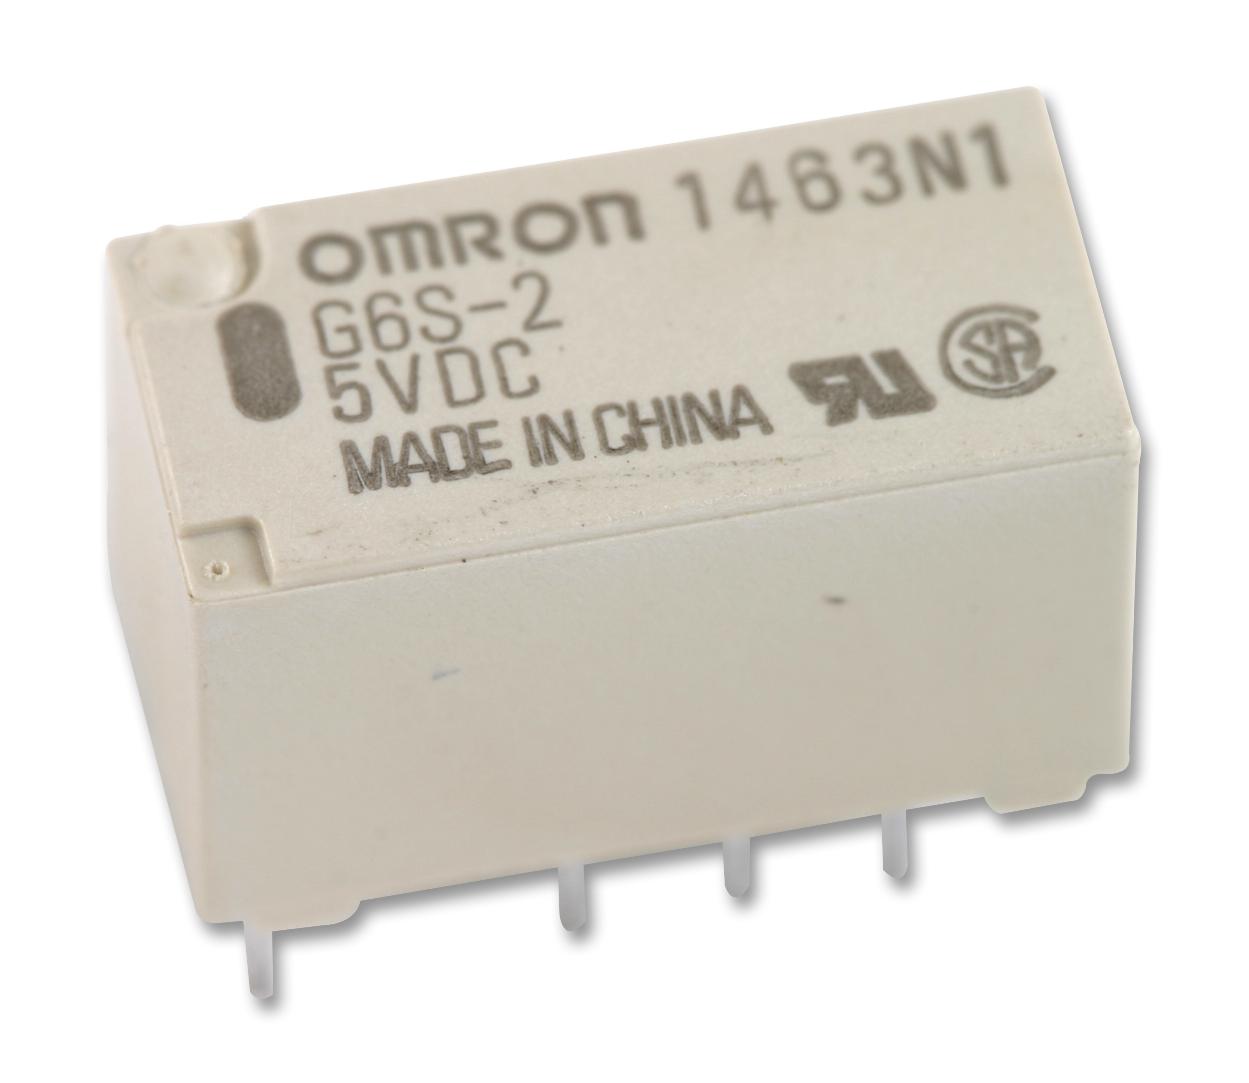 G6S-2   DC24 SIGNAL RELAY, DPDT, 24VDC, 2A, THT OMRON